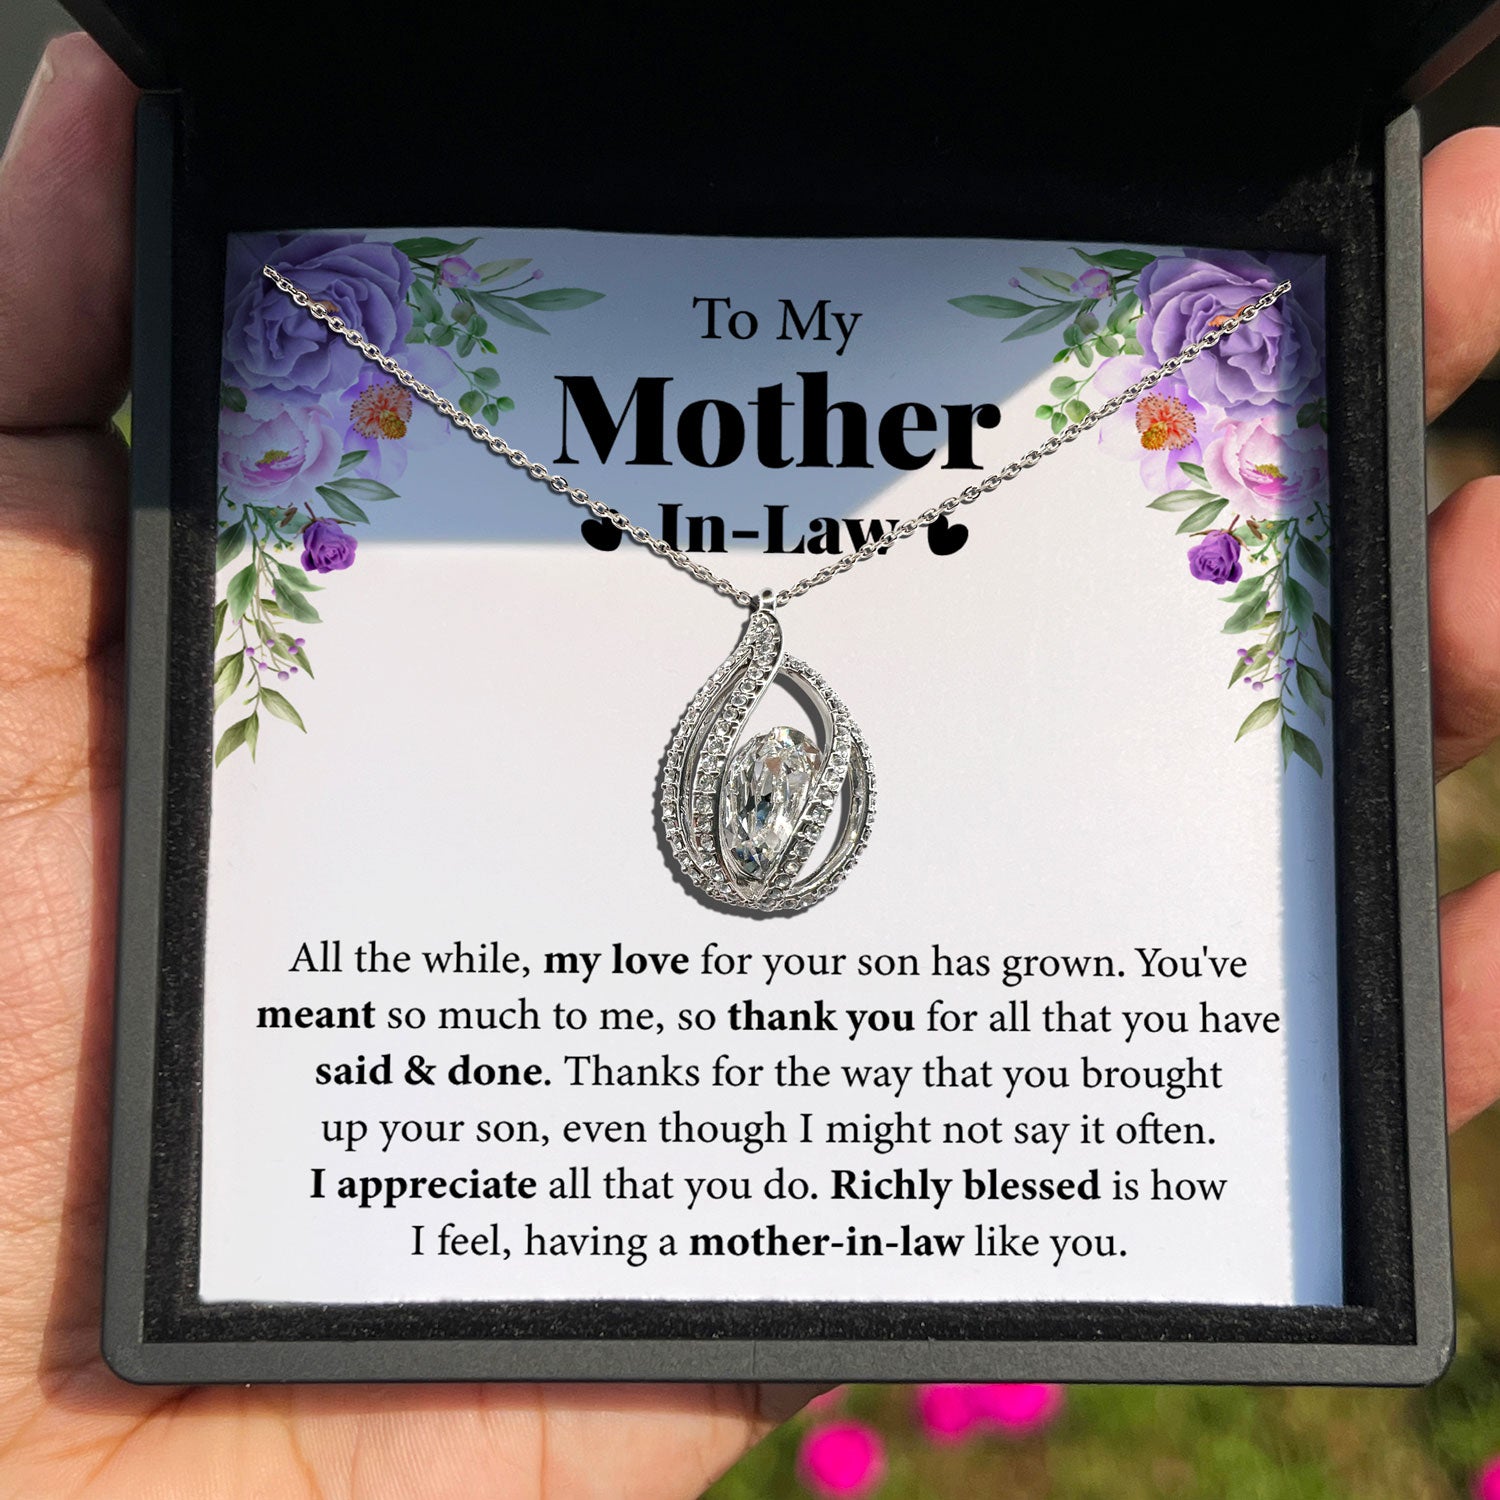 To My Mother-in-law - I Appreciate All That You Do - Orbital Birdcage Necklace